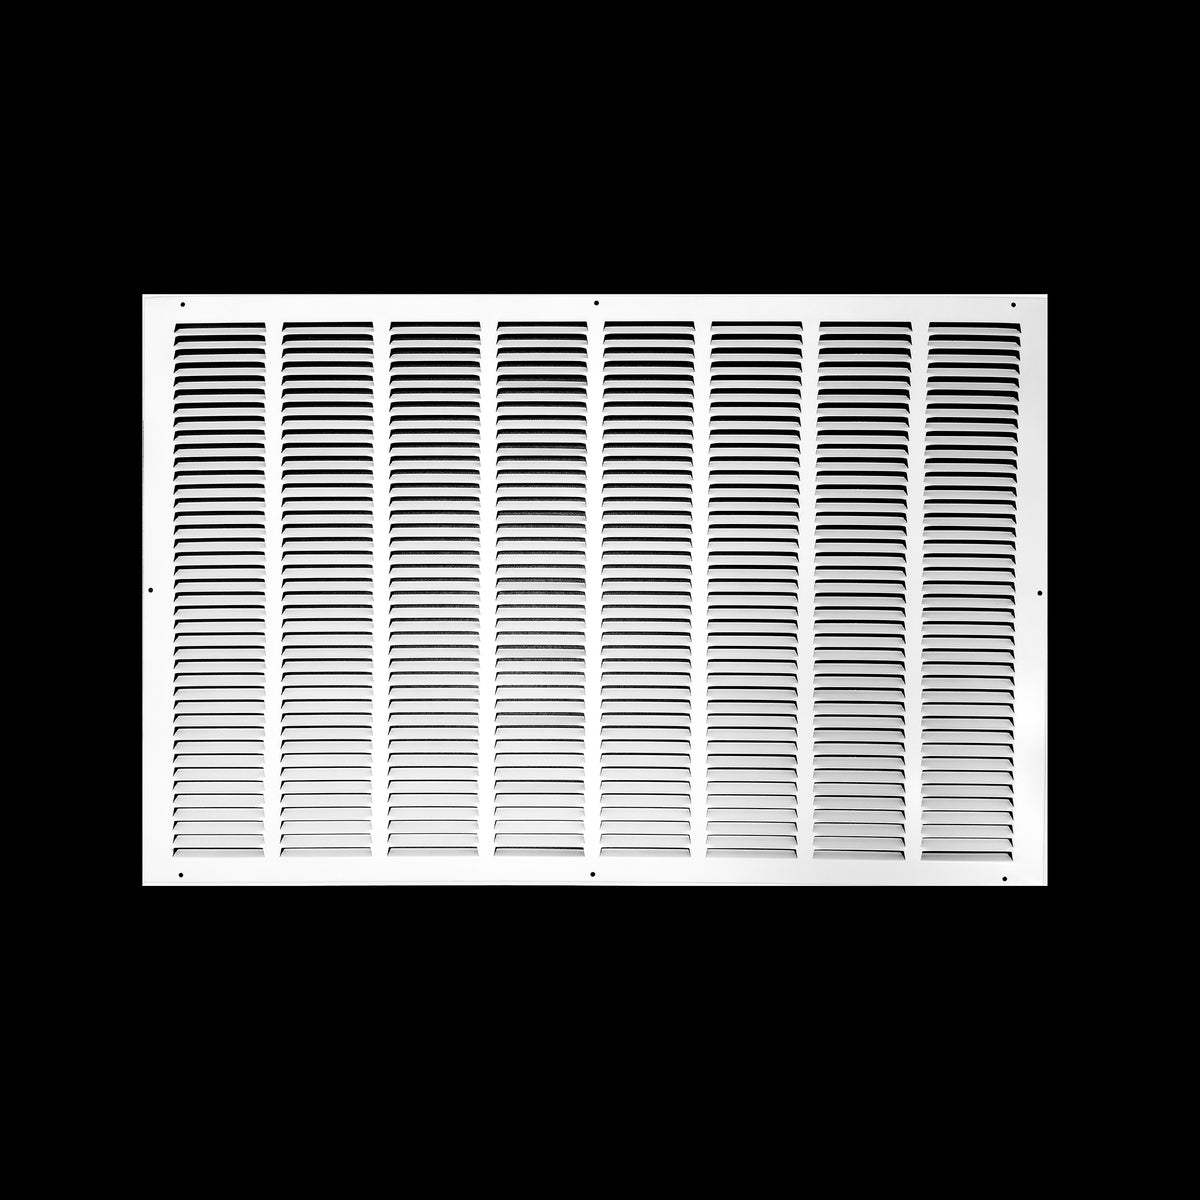 airgrilles 32" x 20" duct opening steel return air grille for sidewall and ceiling hnd-flt-1rag-wh-32x20 038775628570 1